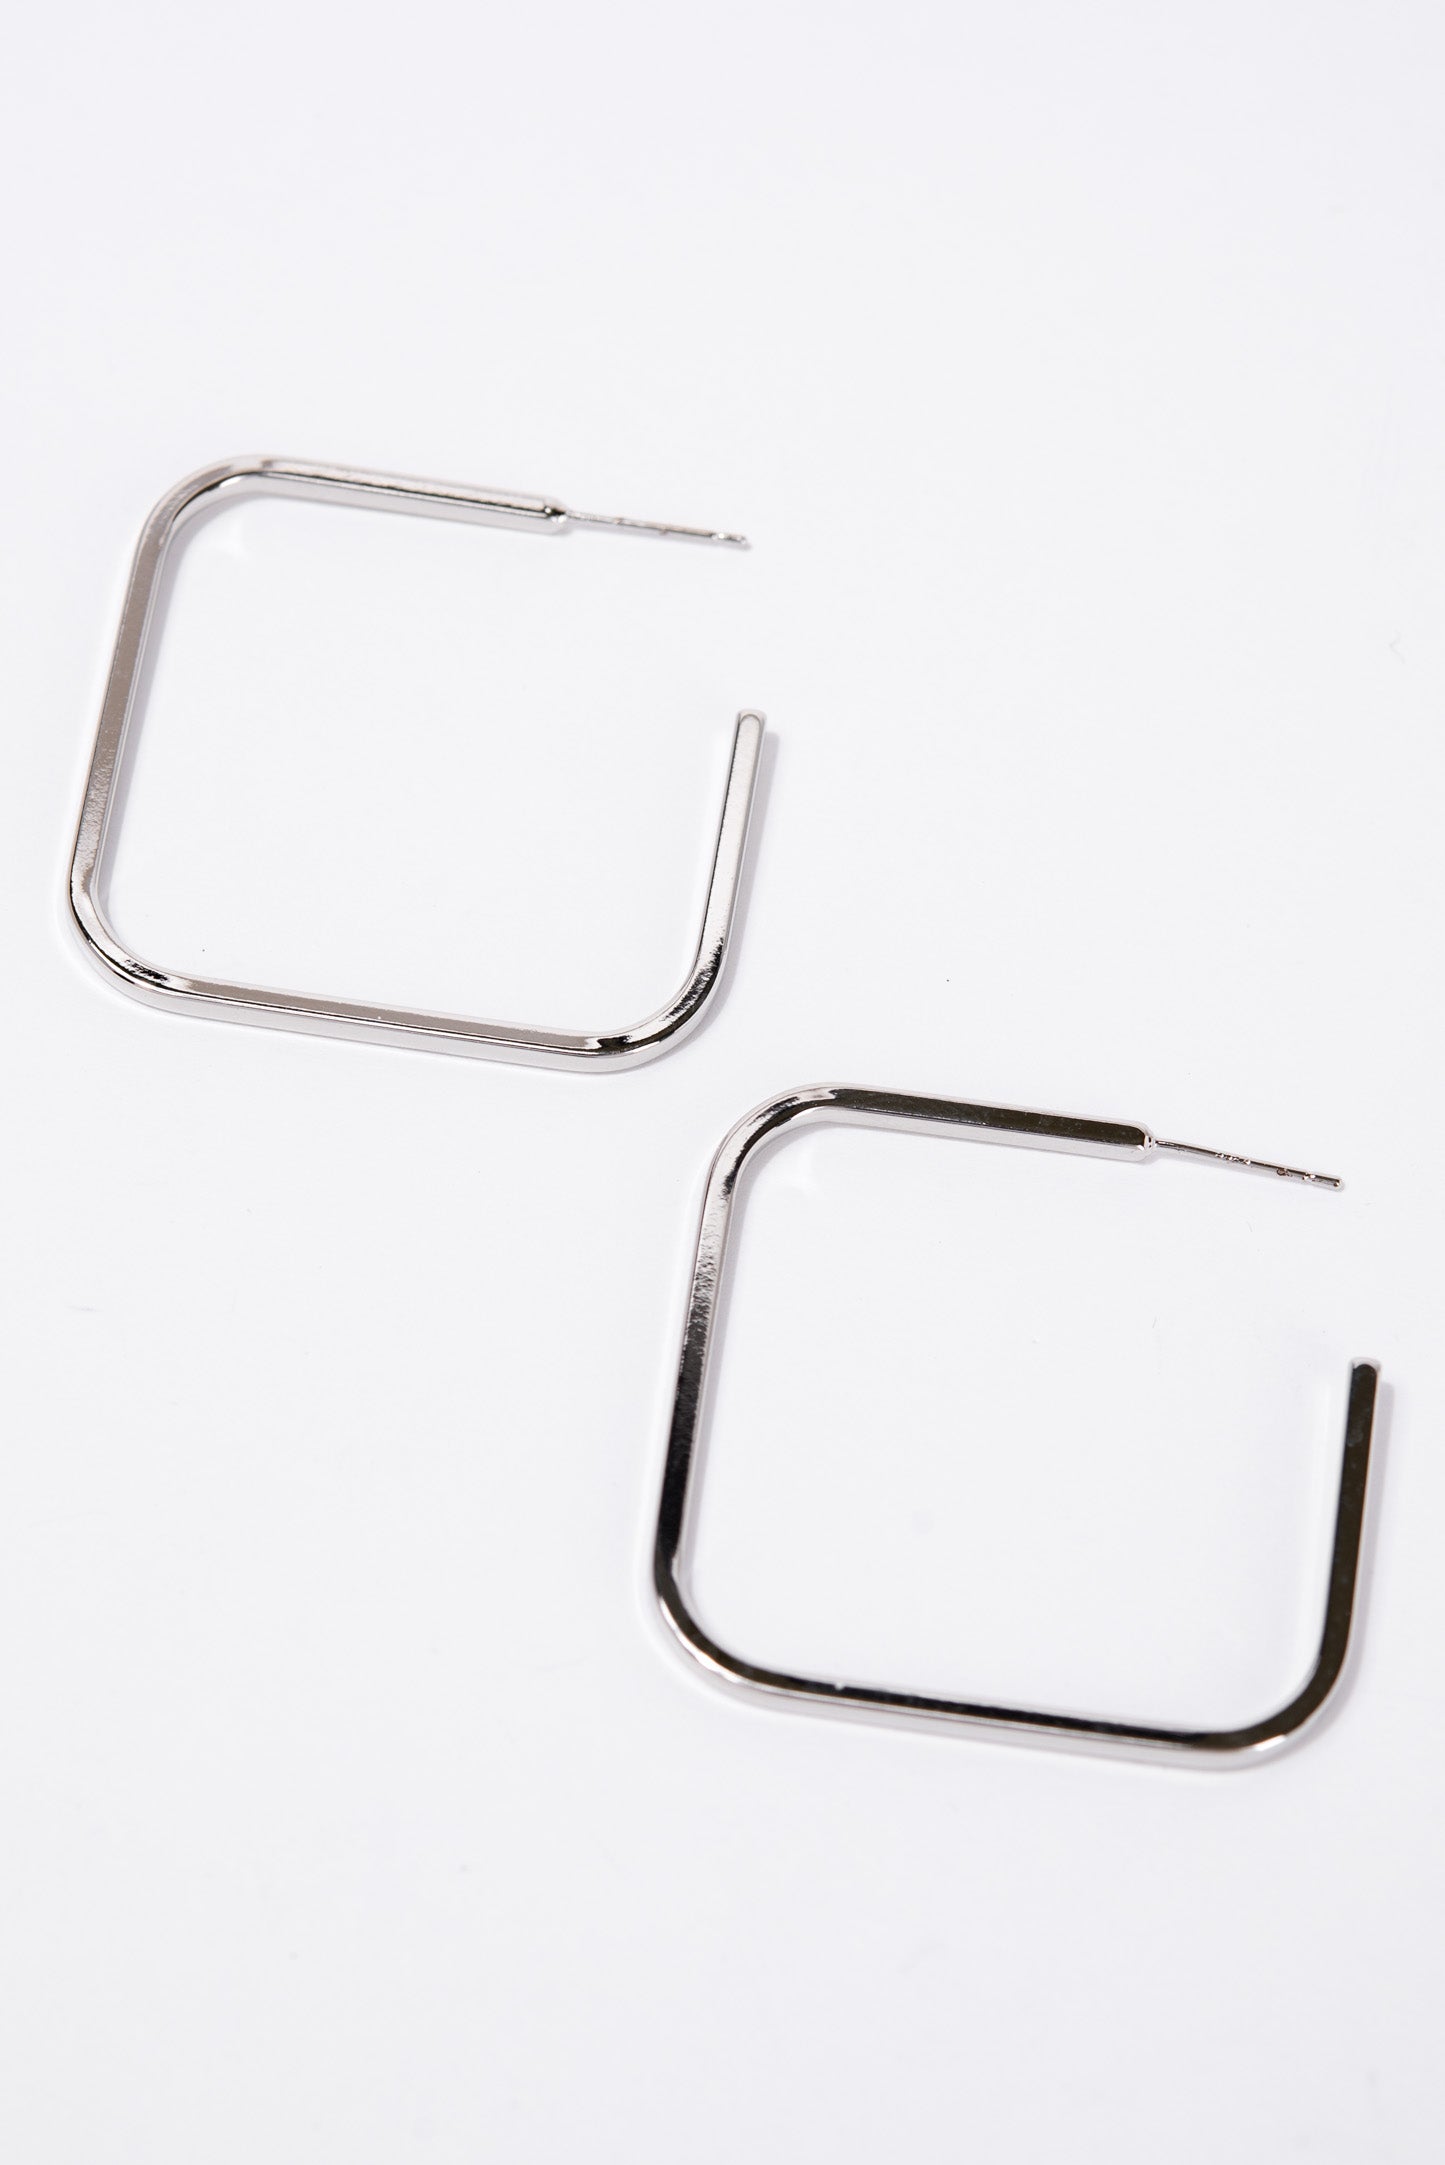 Gabrielle White Gold Plated Open Square Hoop Earrings